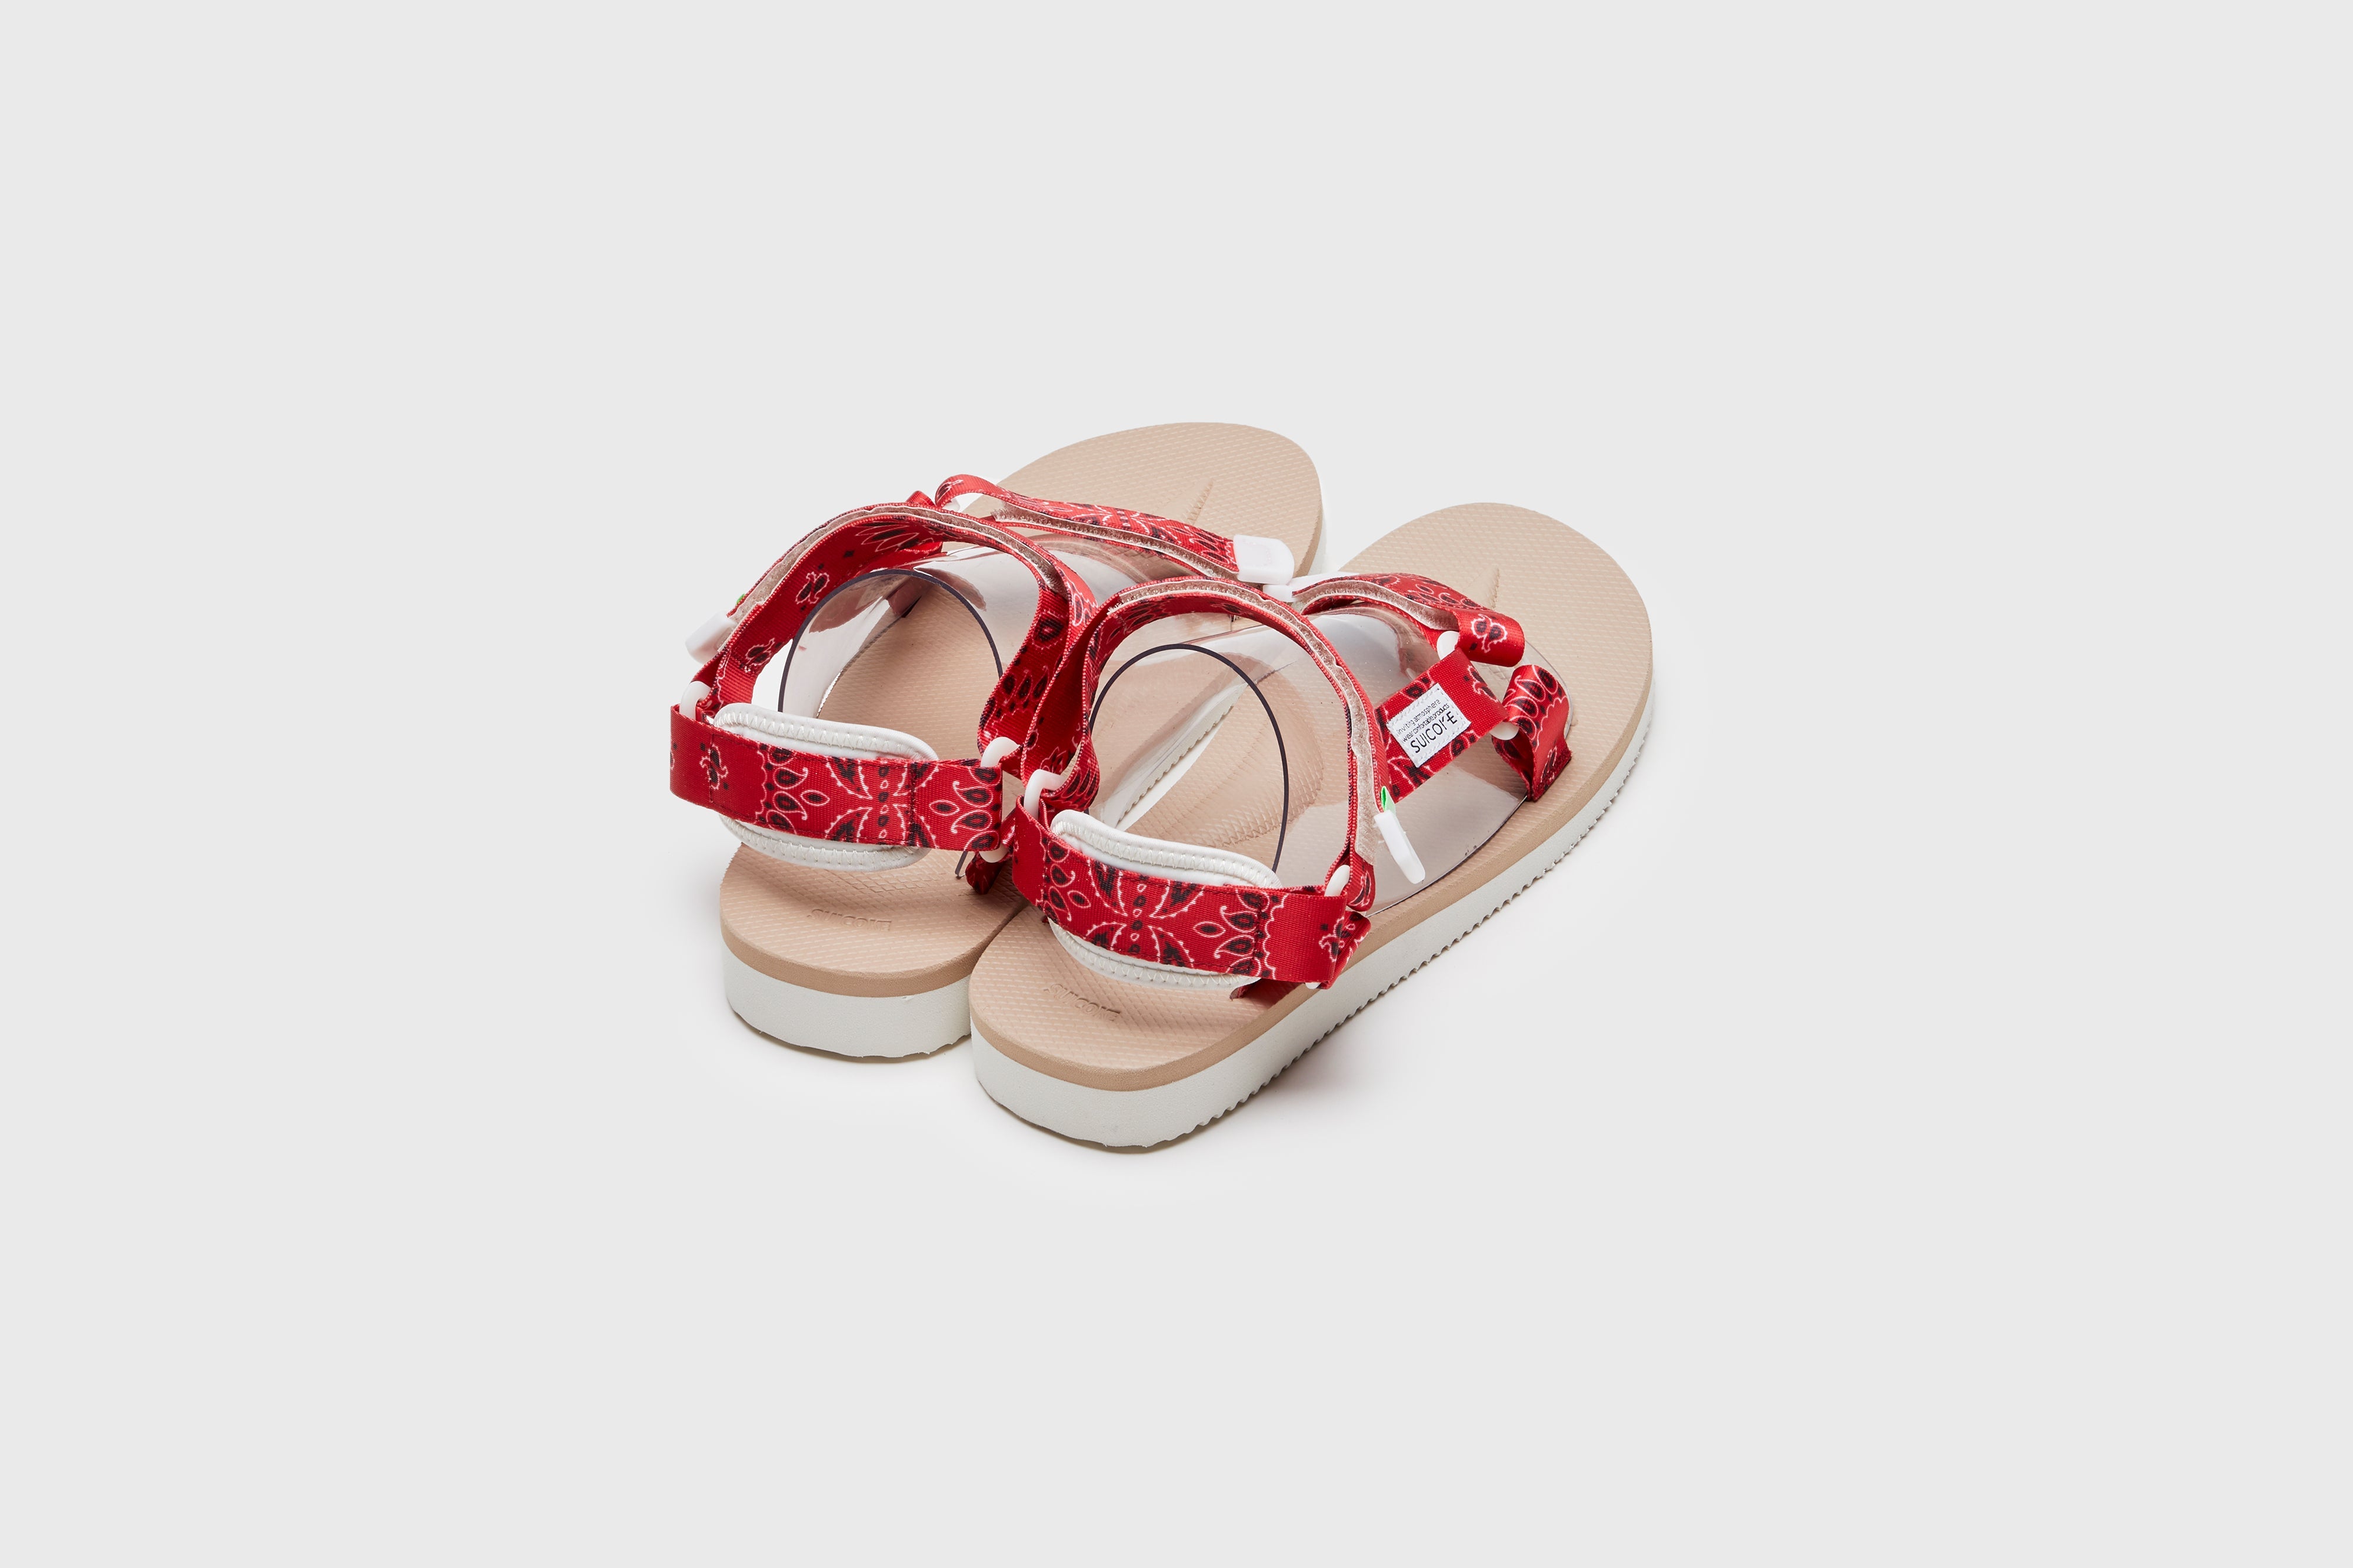 SUICOKE DEPA-Cab-PT05 sandals with red & beige nylon upper, red & beige midsole and sole, strap and logo patch. From Spring/Summer 2023 collection on eightywingold Web Store, an official partner of SUICOKE. OG-022CAB-PT05 RED X BEIGE